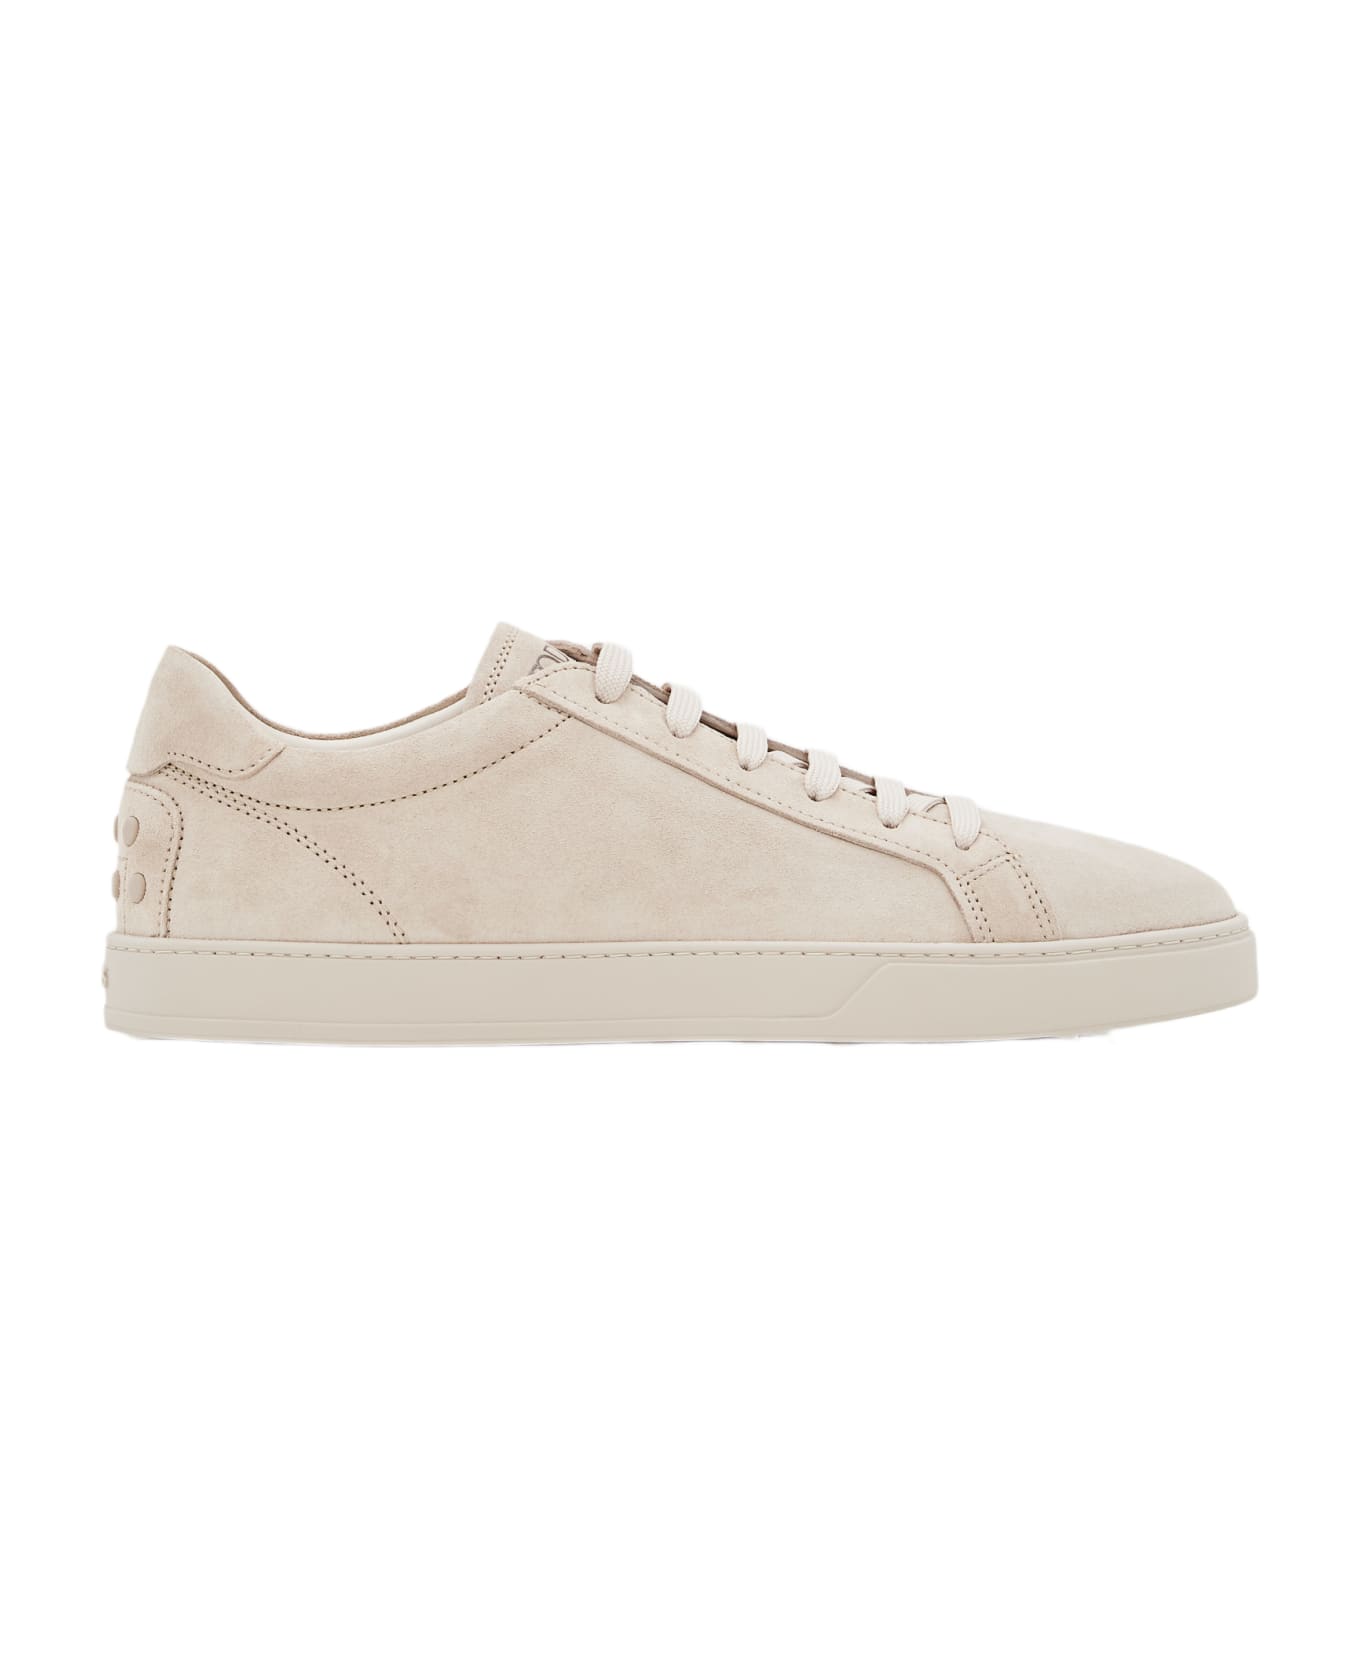 Tod's Lace Up Sneakers - Light bEIGE スニーカー